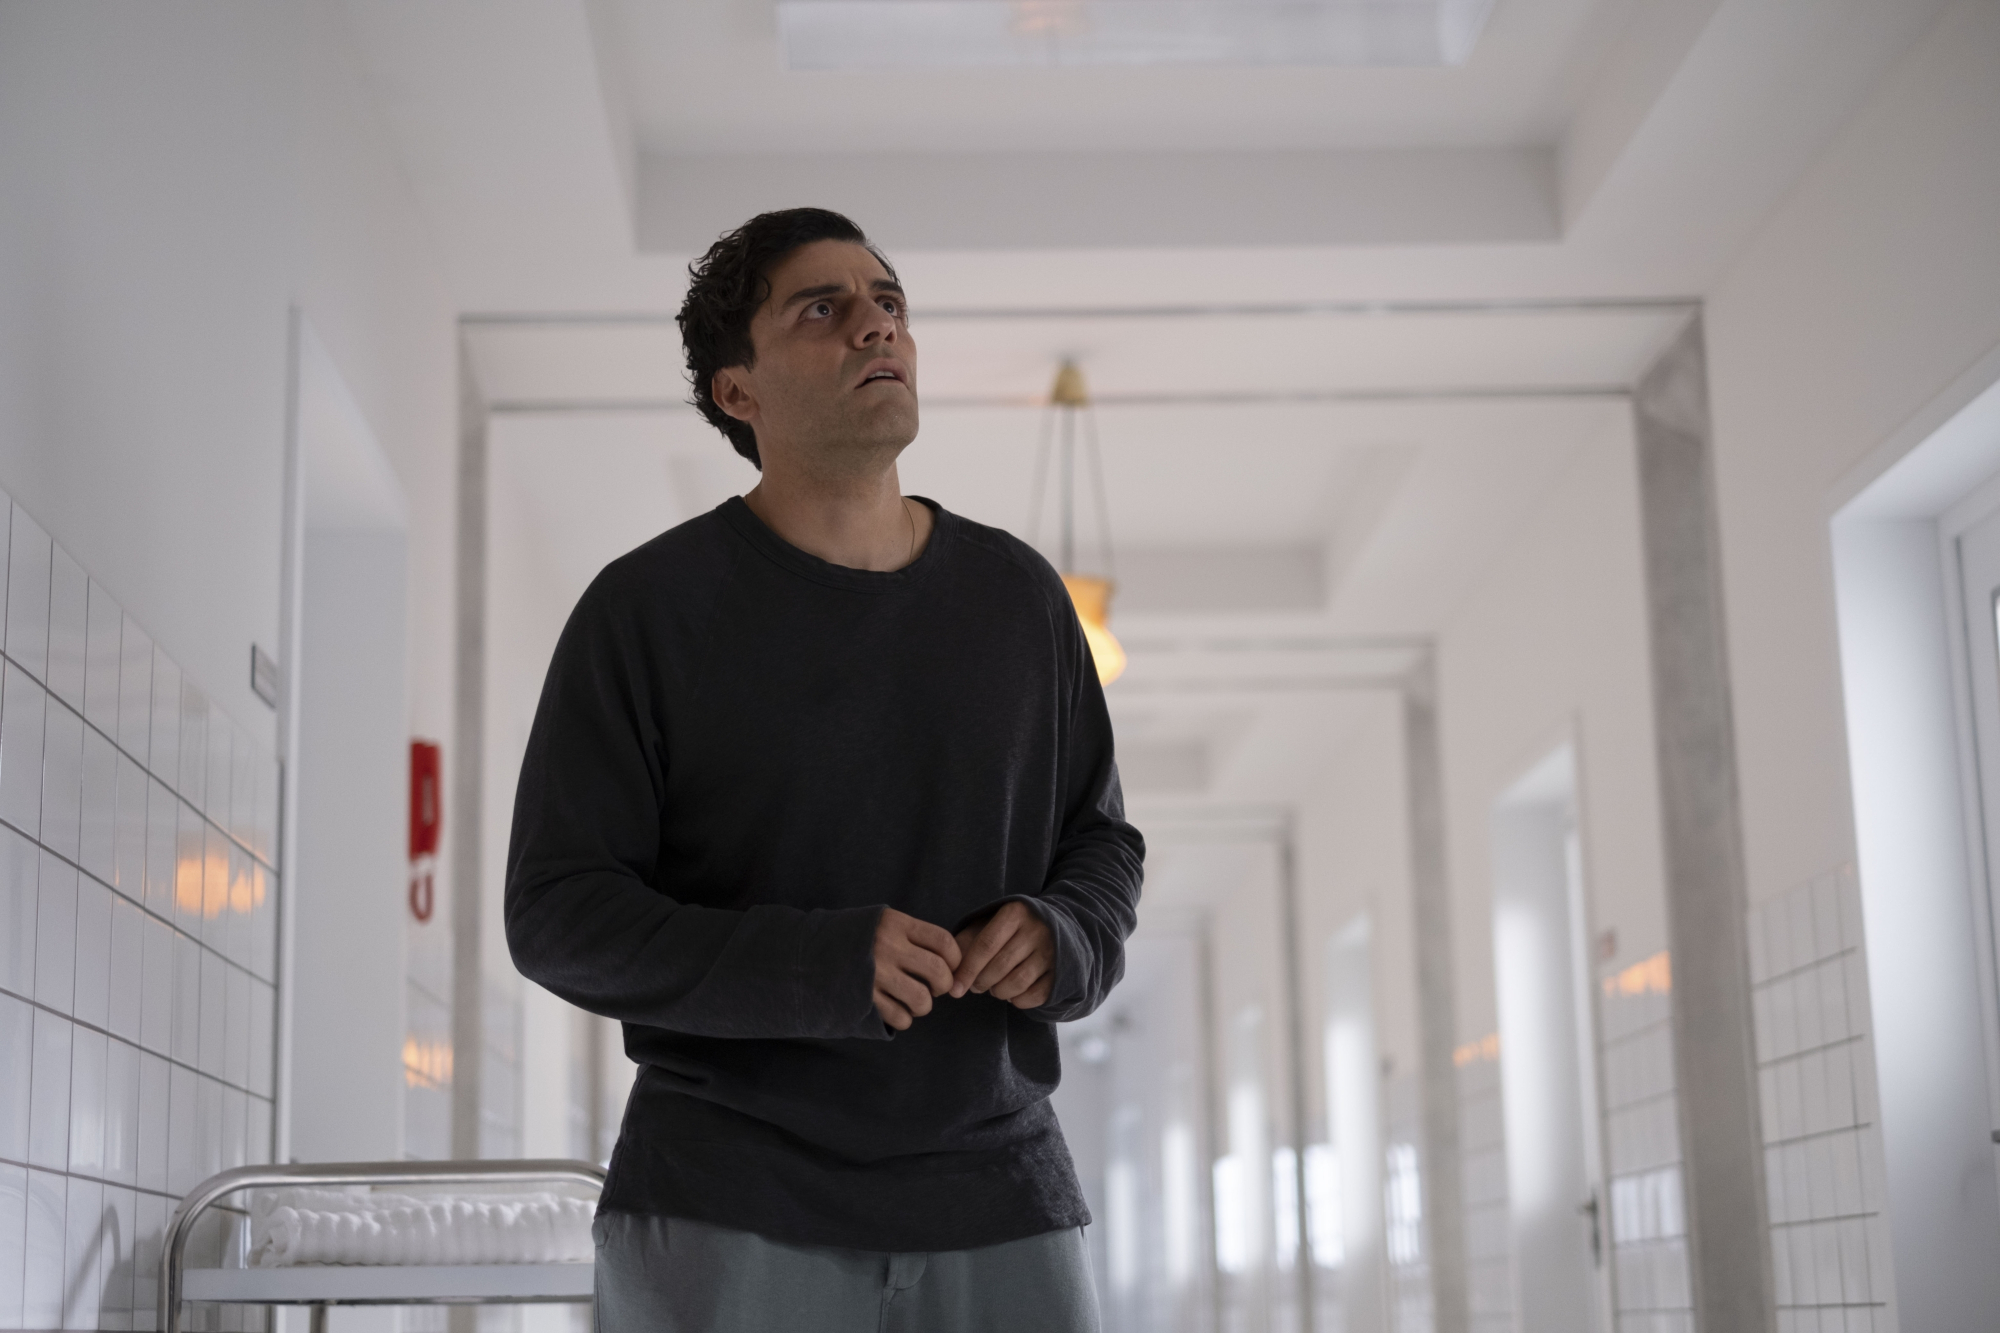 Oscar Isaac as Steven Grant in 'Moon Knight' Episode 5, which sets up the finale. He's wearing a black shirt and standing in an all-white hallway.